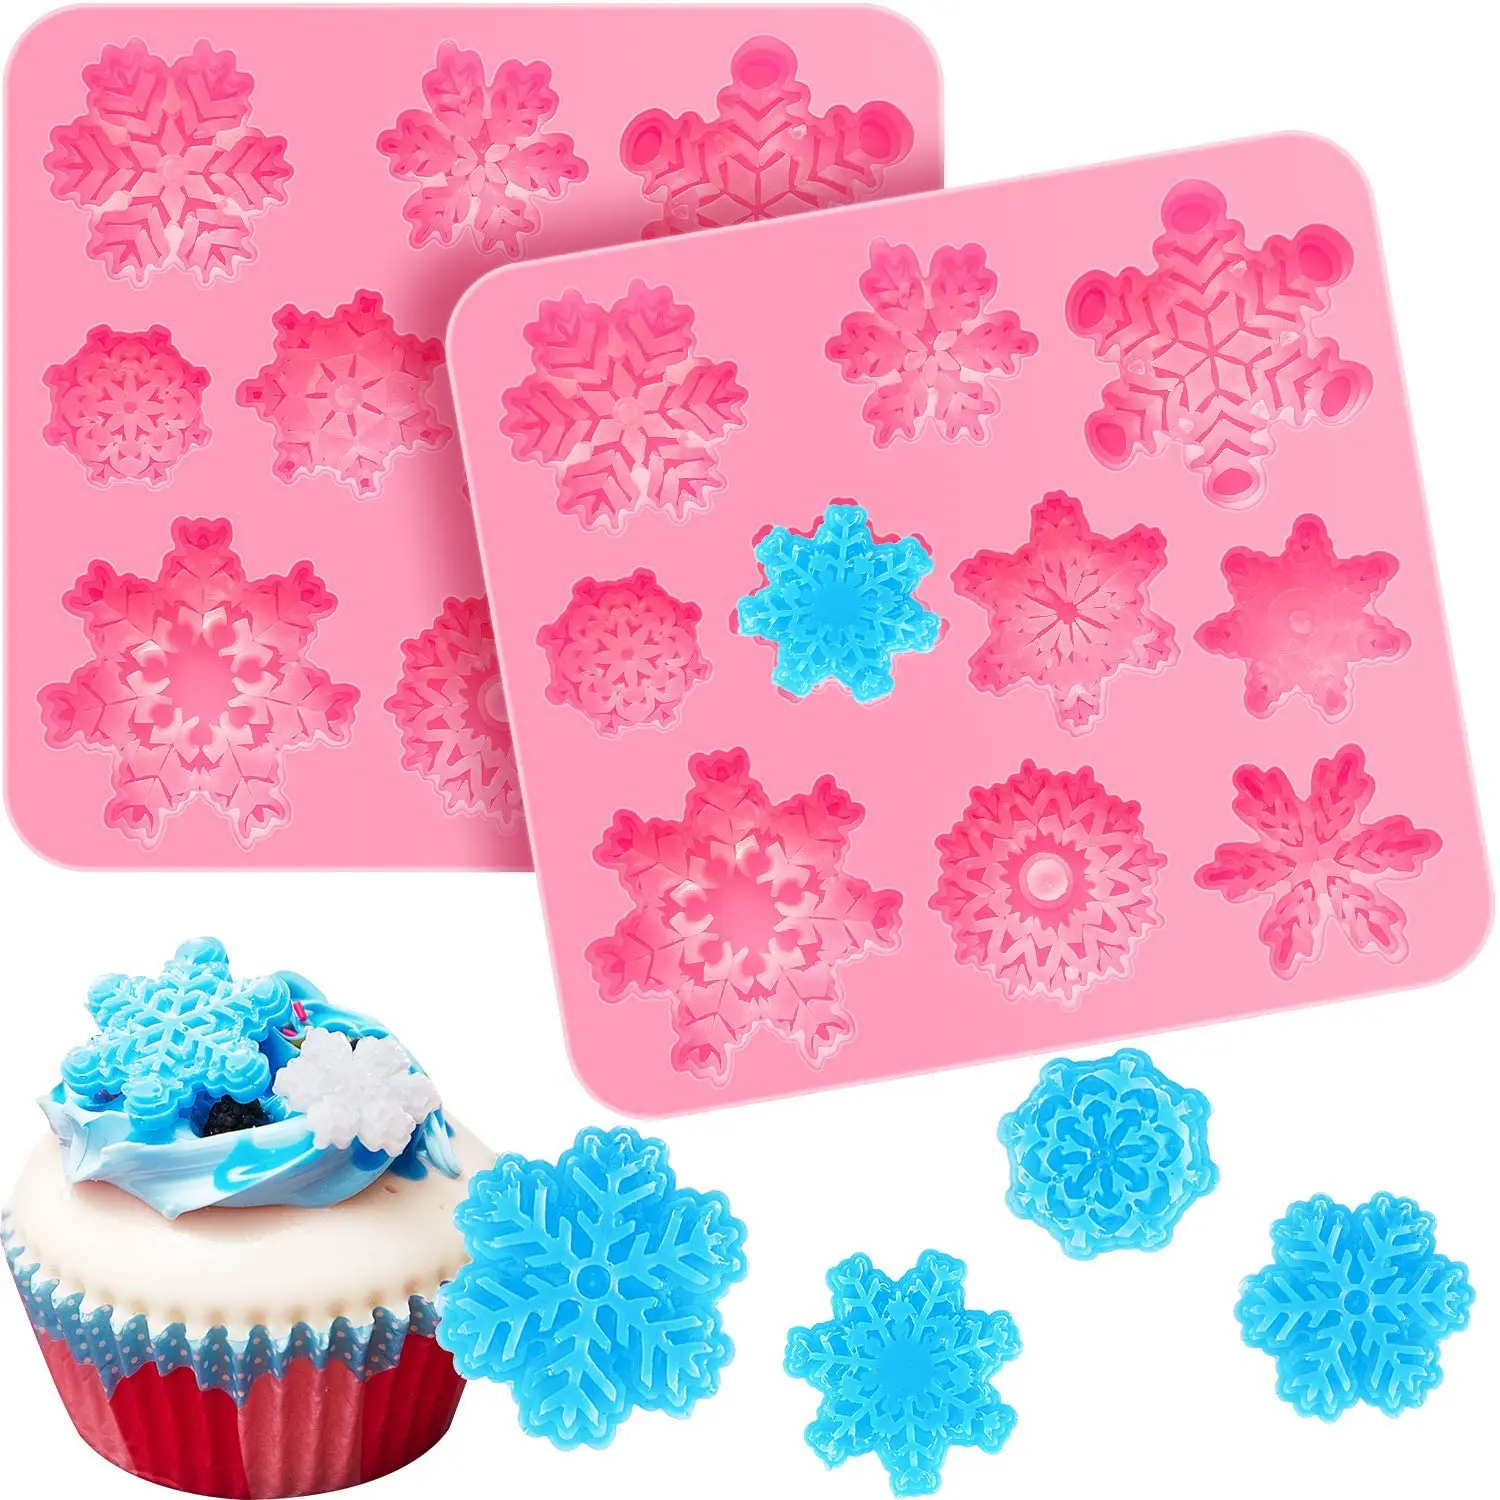 

Silicone Mold Snowflake Cake Candy Mold for Christmas DIY Handmade Chocolate Cake Decoration, Customized color